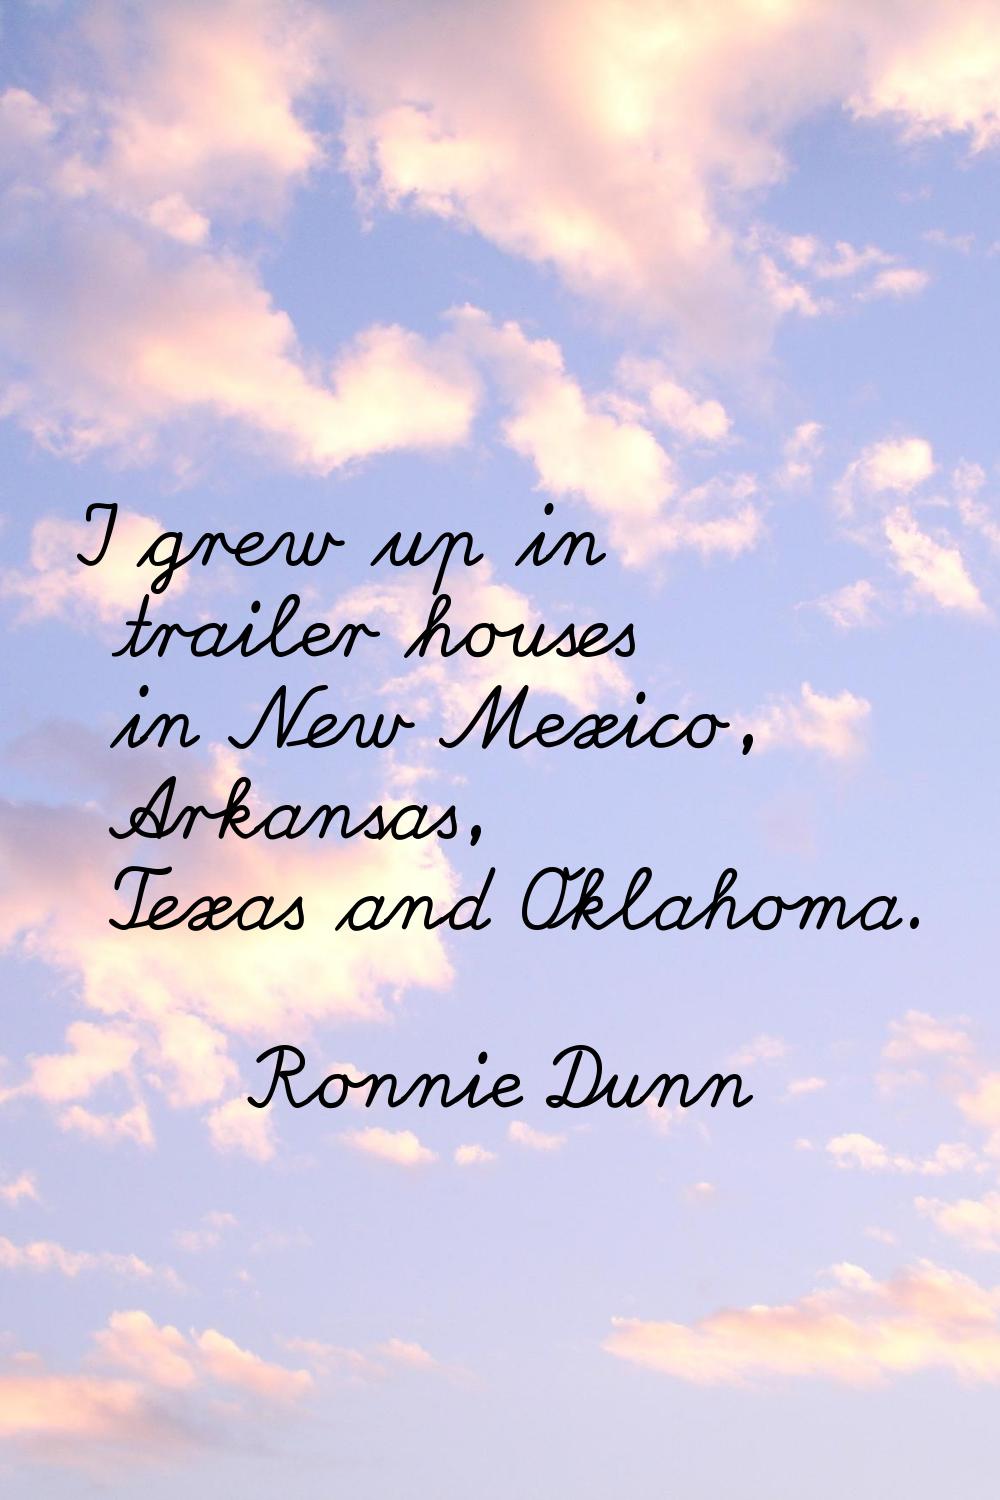 I grew up in trailer houses in New Mexico, Arkansas, Texas and Oklahoma.